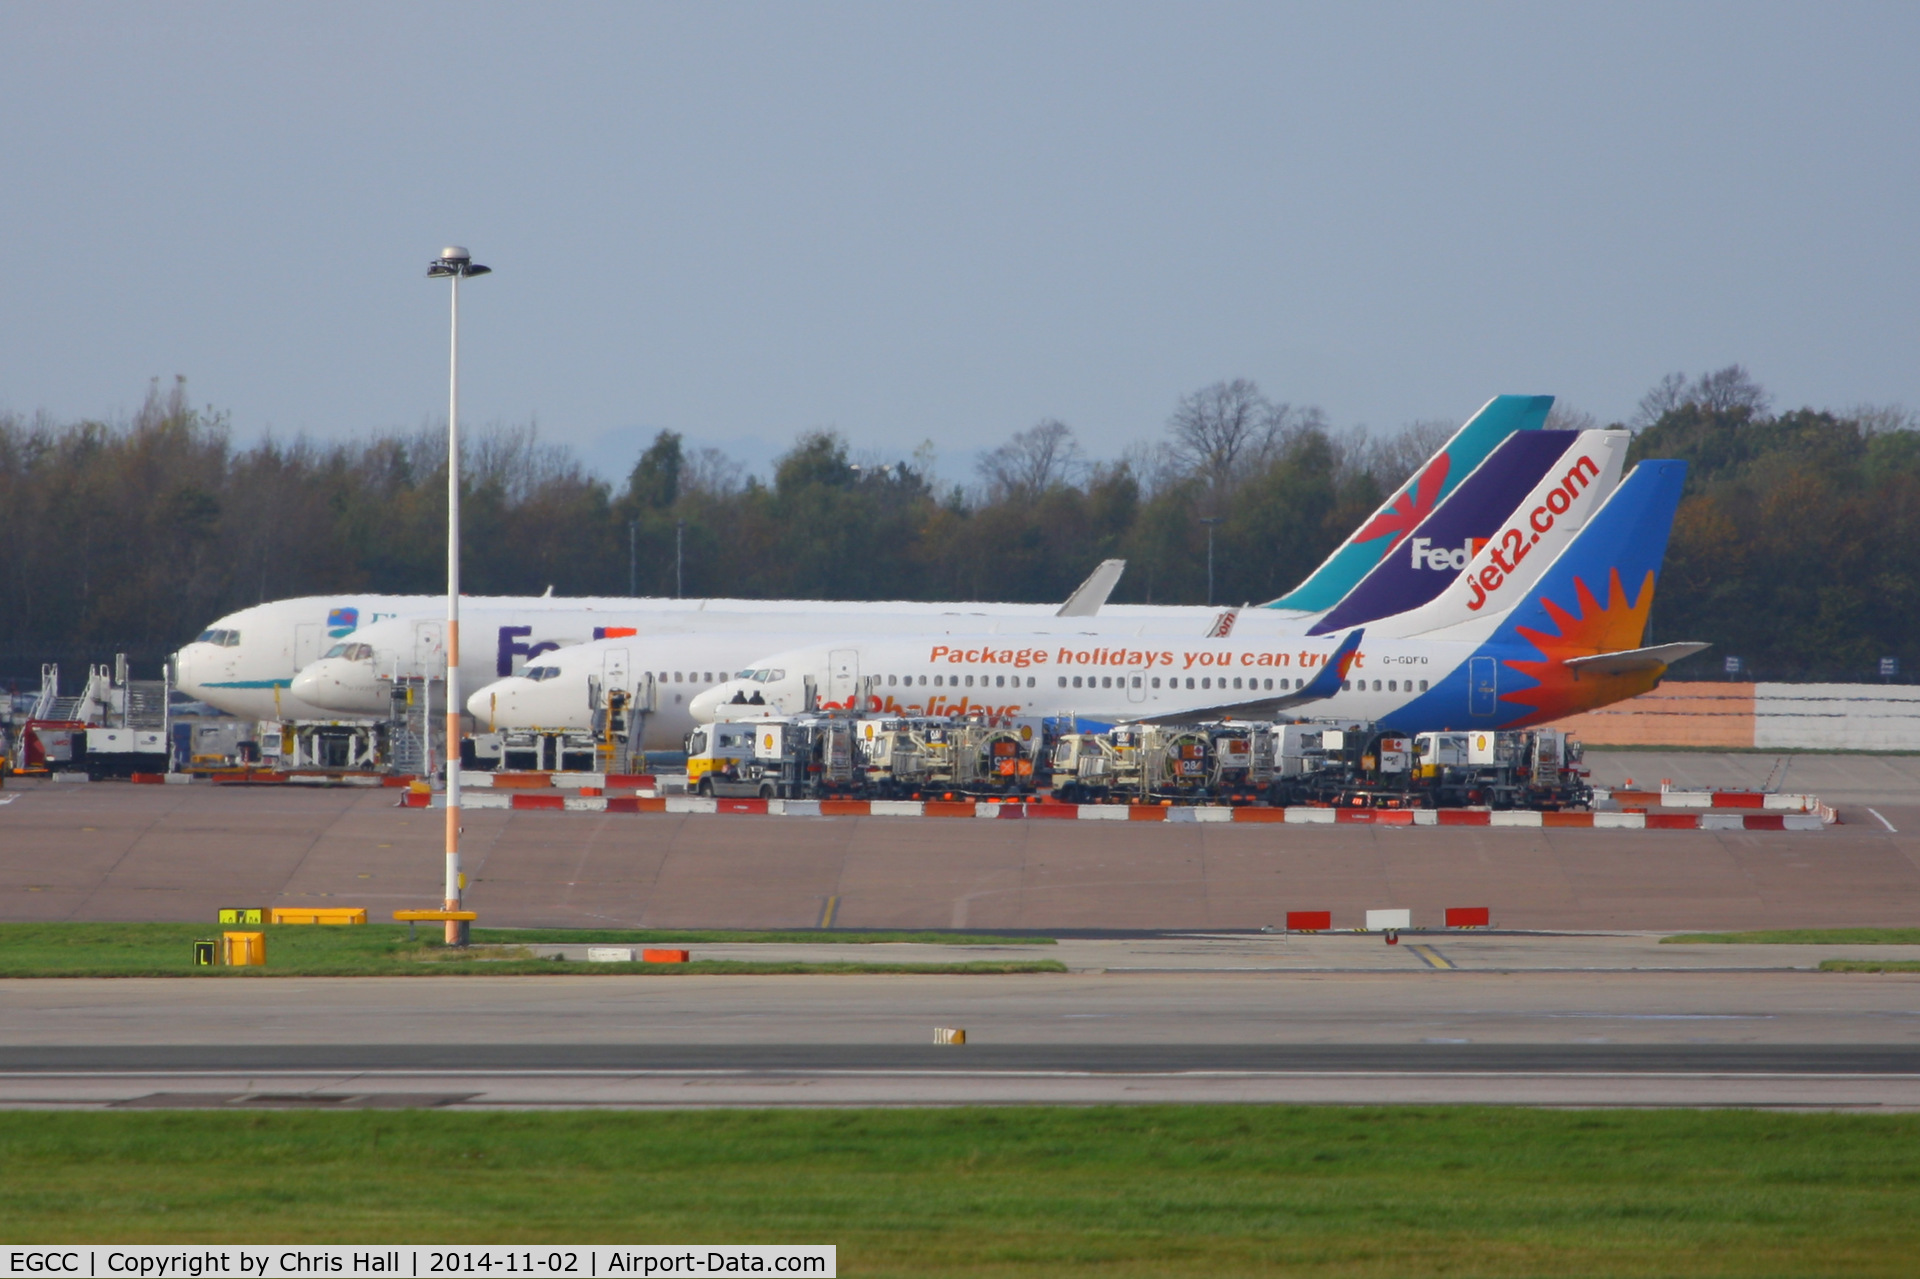 Manchester Airport, Manchester, England United Kingdom (EGCC) - Boeings parked on the remote stands at Manchester